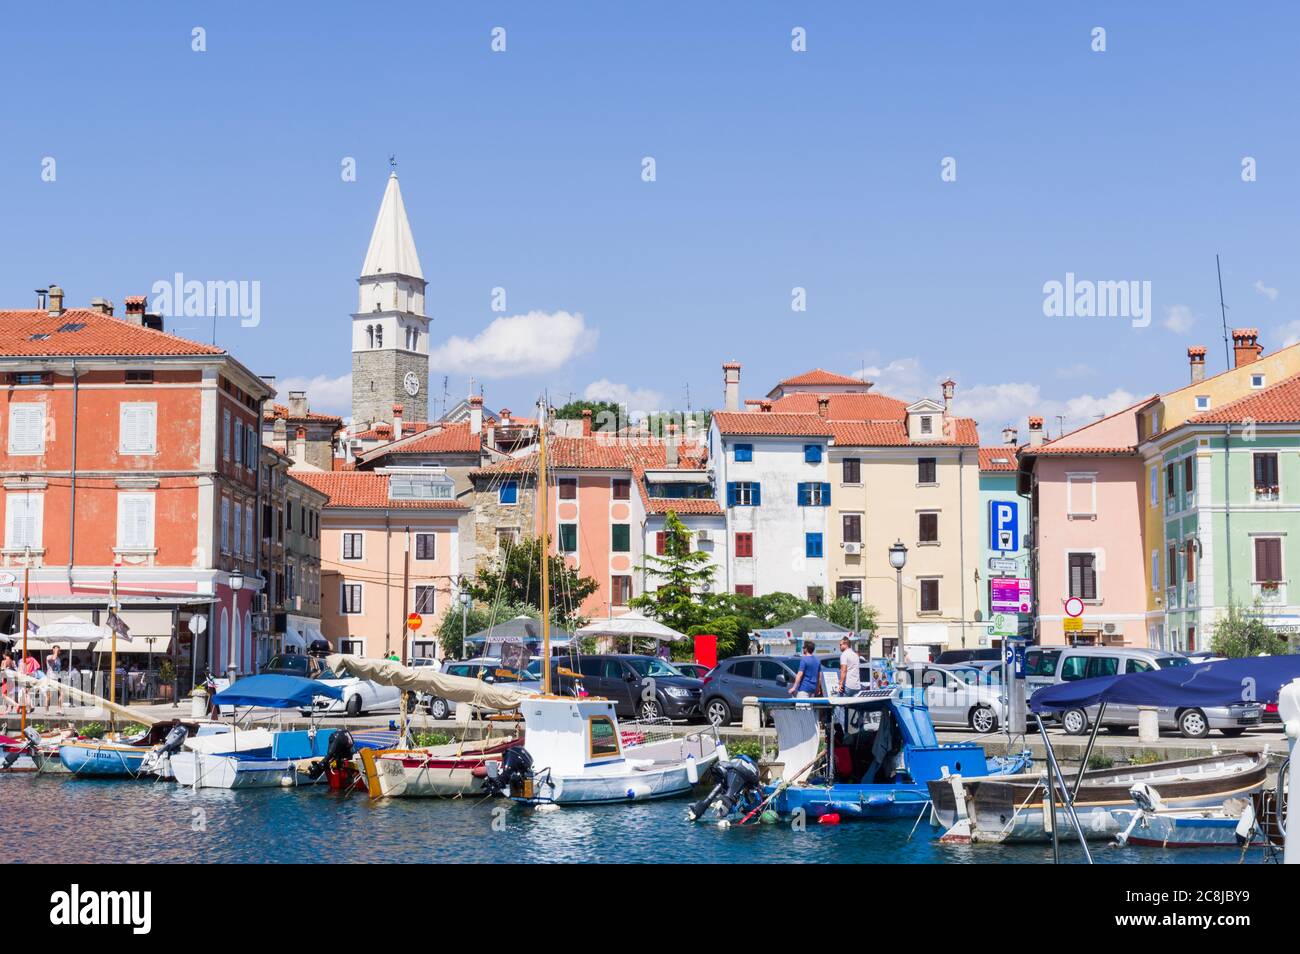 Izola, Slovenia (23rd July 2020) - The harbour of Izola with its colourful old houses and the bell tower of the dome Stock Photo